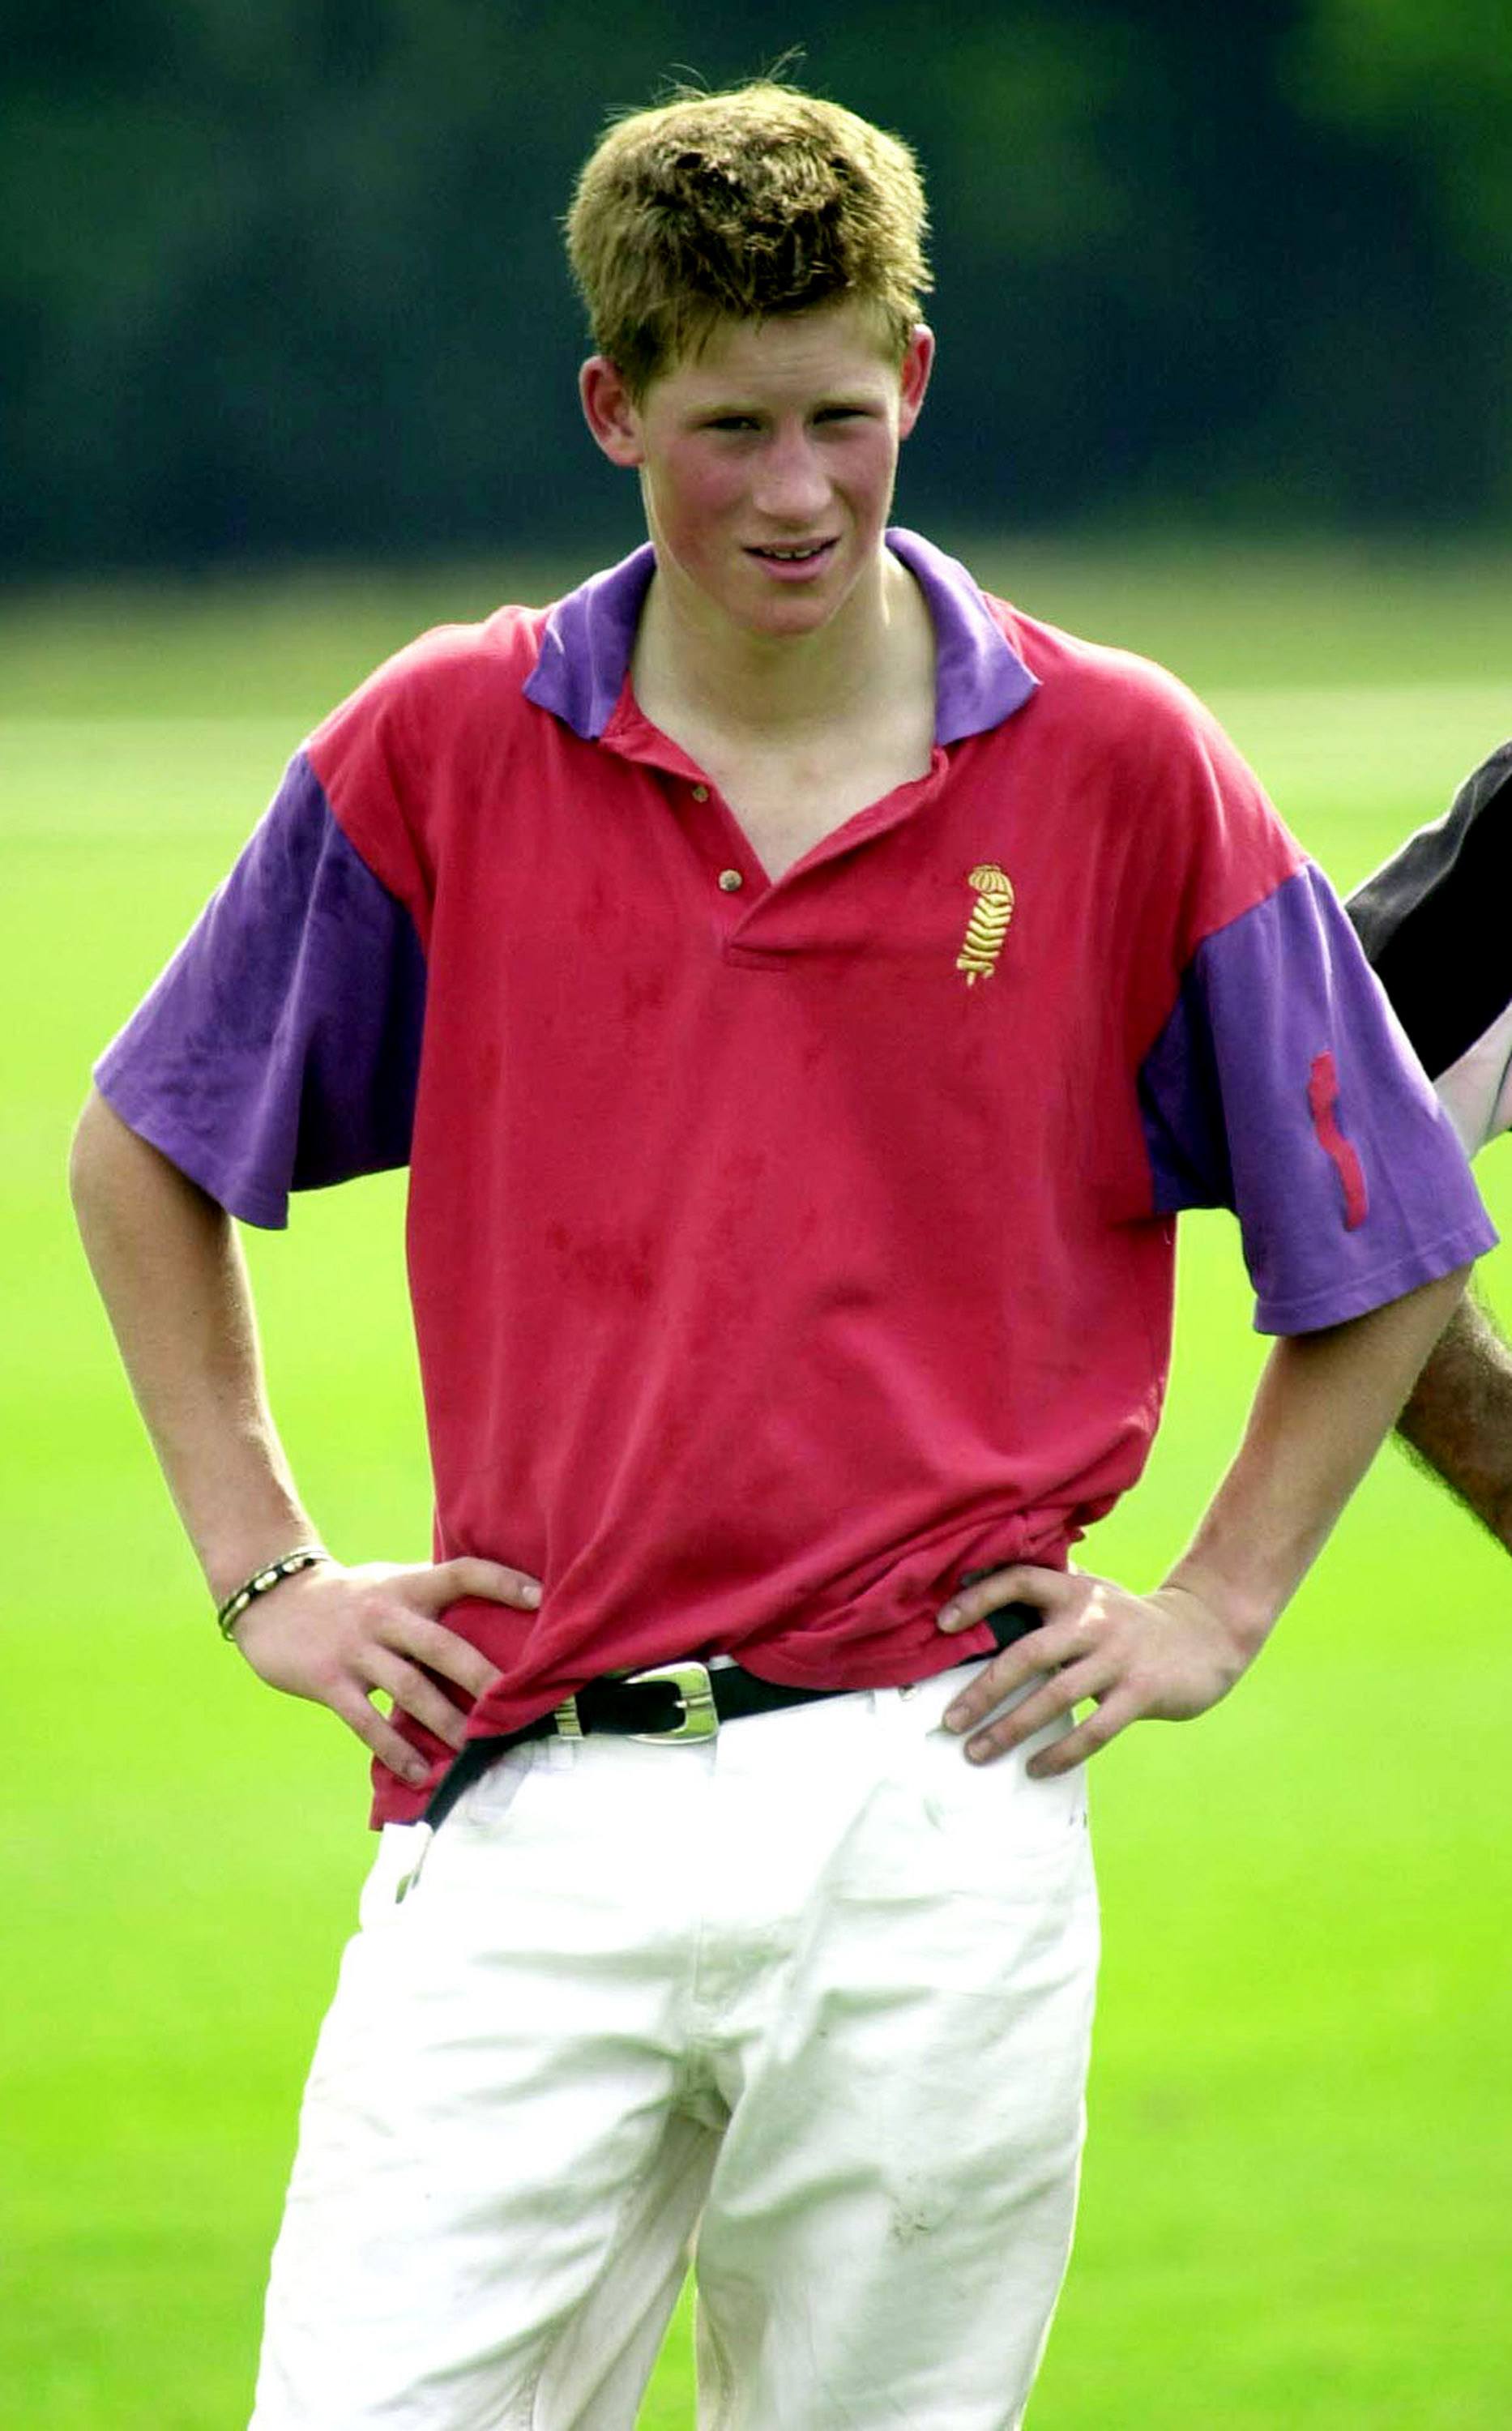 Britain''s Prince Harry takes part in an exhibition Polo match July 28, 2001 